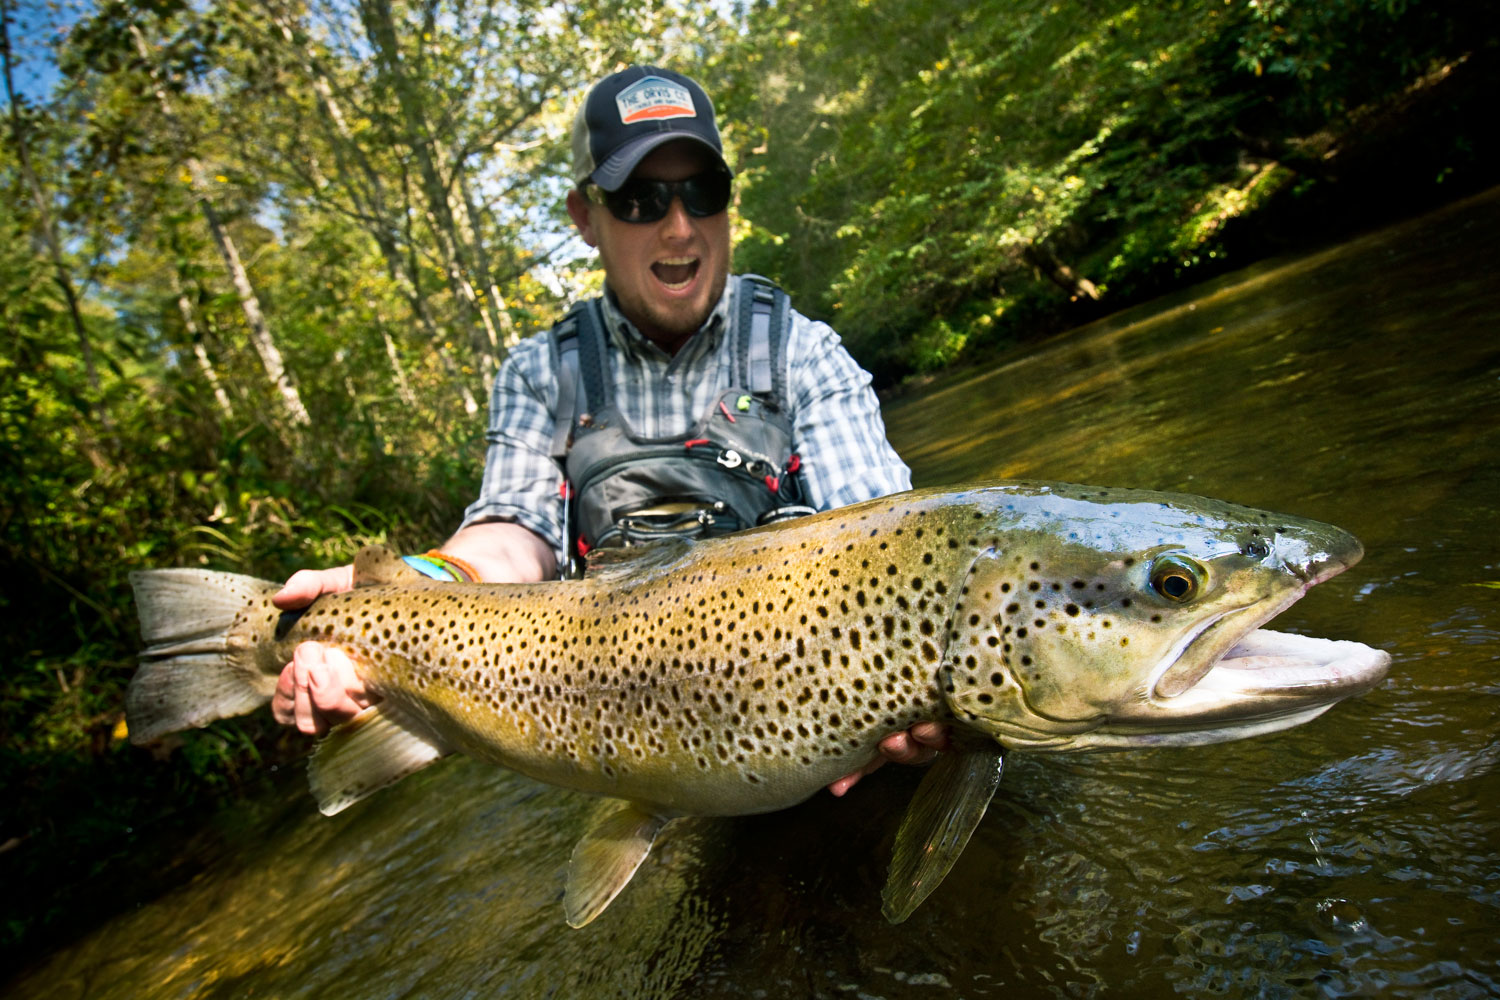 Fly Fishing: 6 Sight-Fishing Tips for Shallow Water Trout - Fly Fishing, Gink and Gasoline, How to Fly Fish, Trout Fishing, Fly Tying